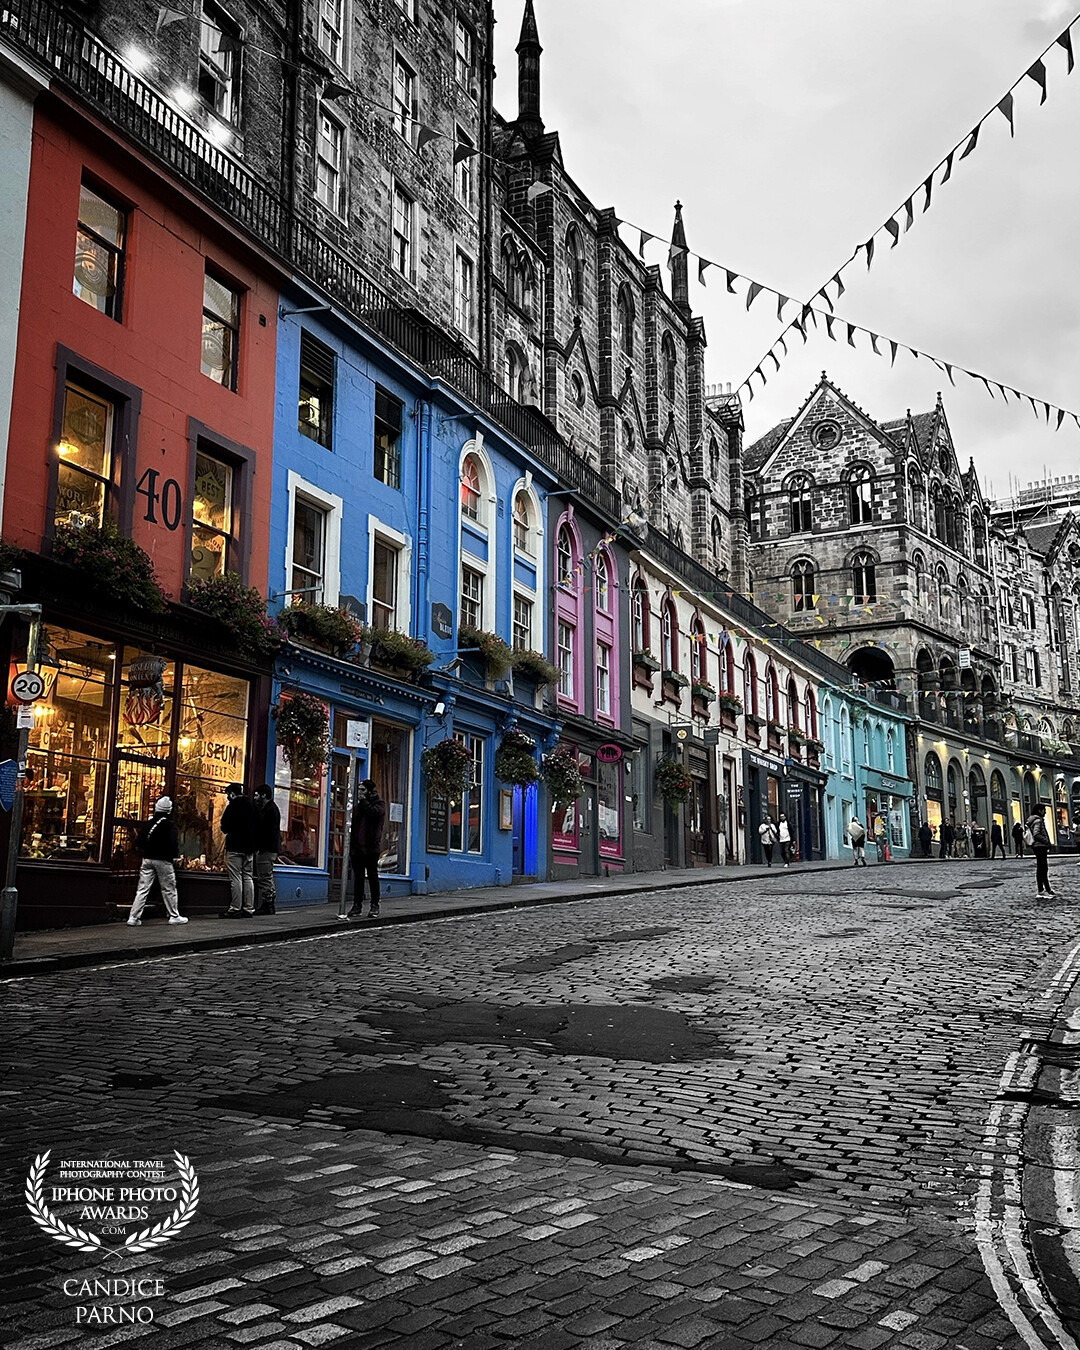 Victoria Street in Edinburgh, Scotland, with its colourful facades, is rumoured to be J.K. Rowling’s inspiration for Diagon Alley in the Harry Potter Series of books.